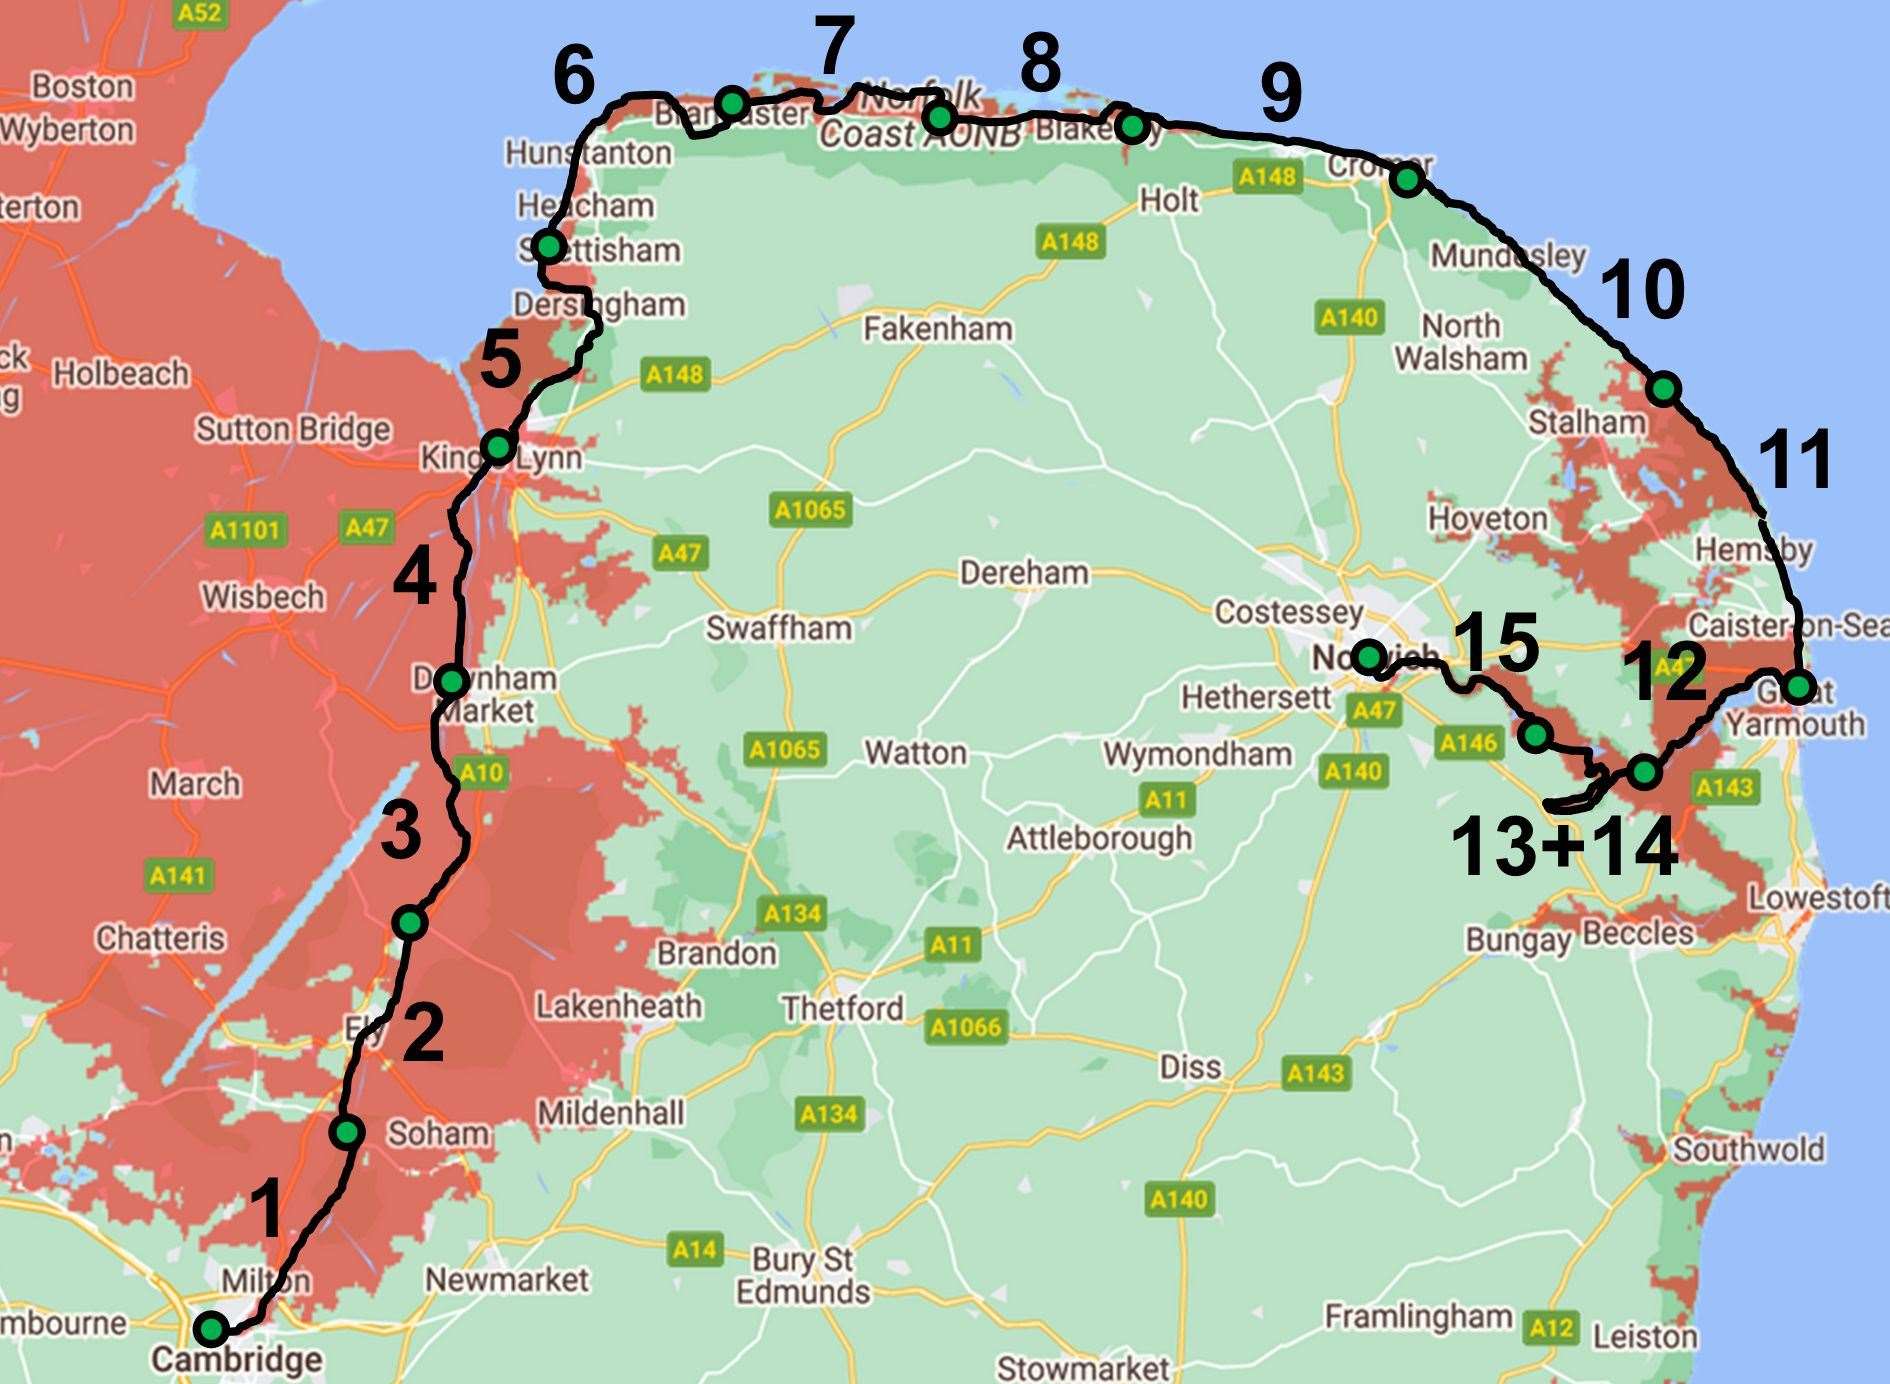 A map to show the route Dr Gardner will take, the red indicates places at the most risk .